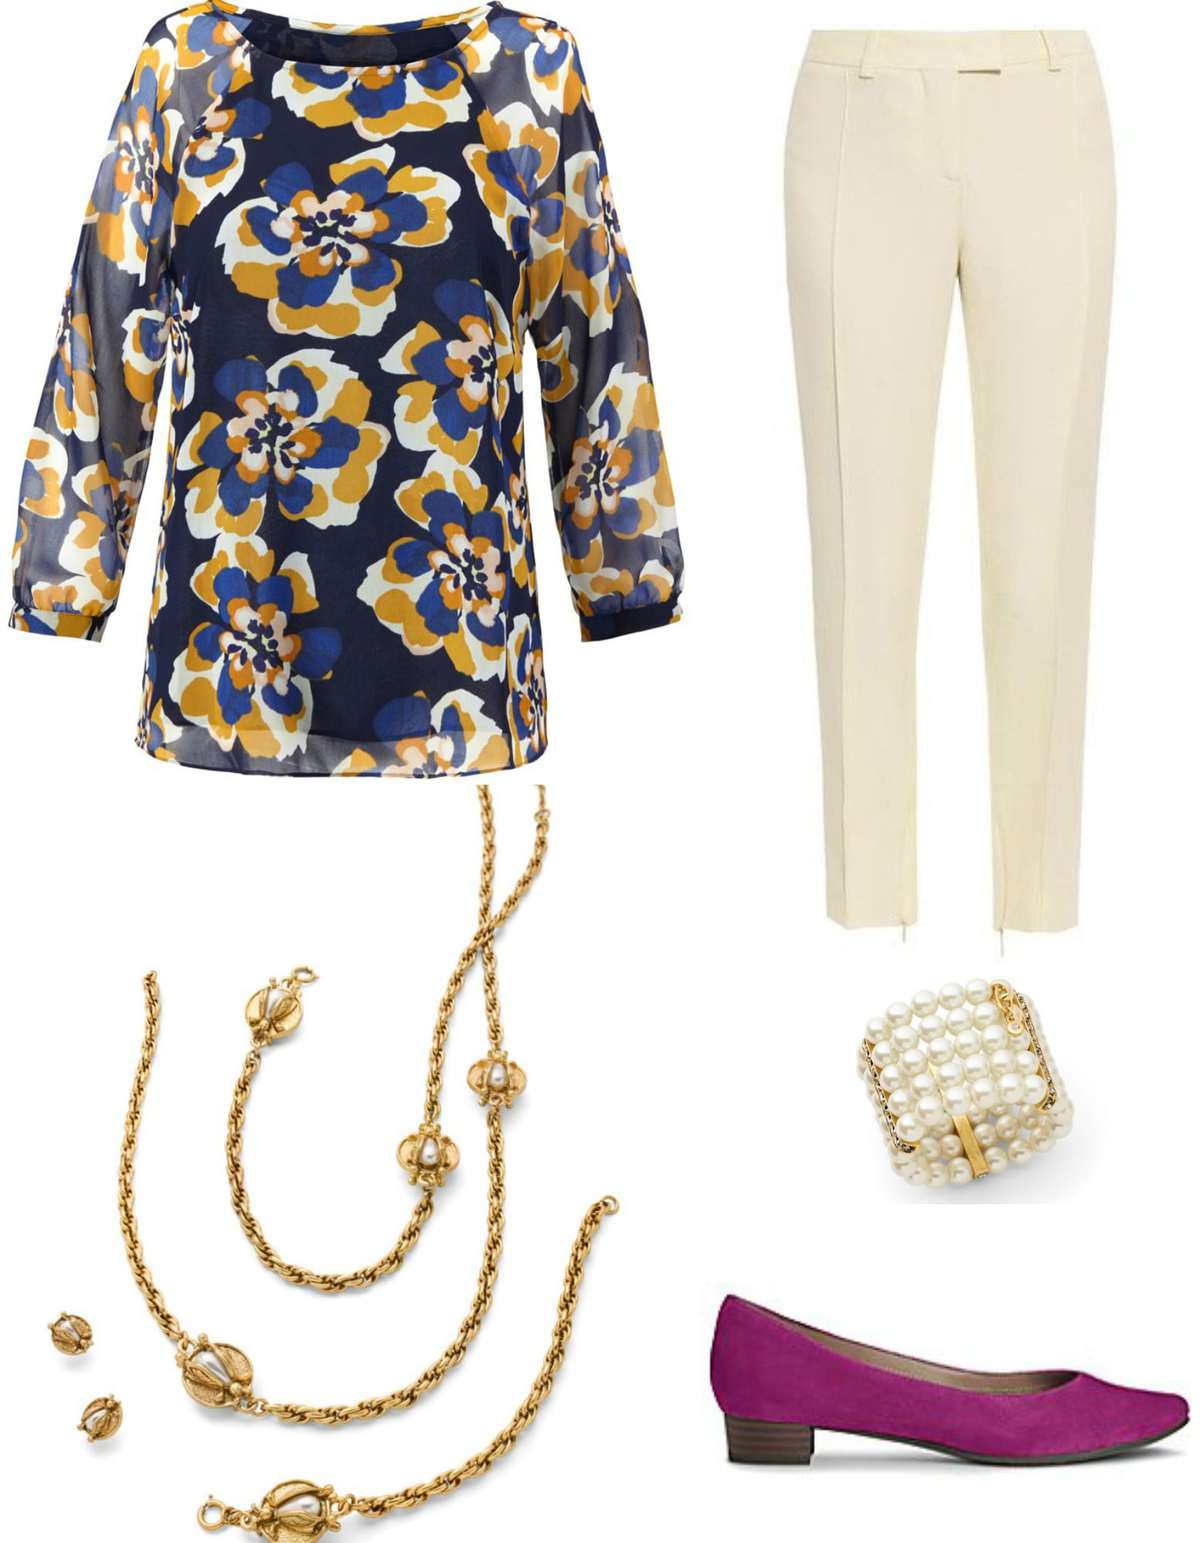 The cabi Lydia blouse styled with ivory ankle length pants, the cabi Buzz Necklace, Heritage Bracelet, and Aerosoles Subway pumps in purple suede.